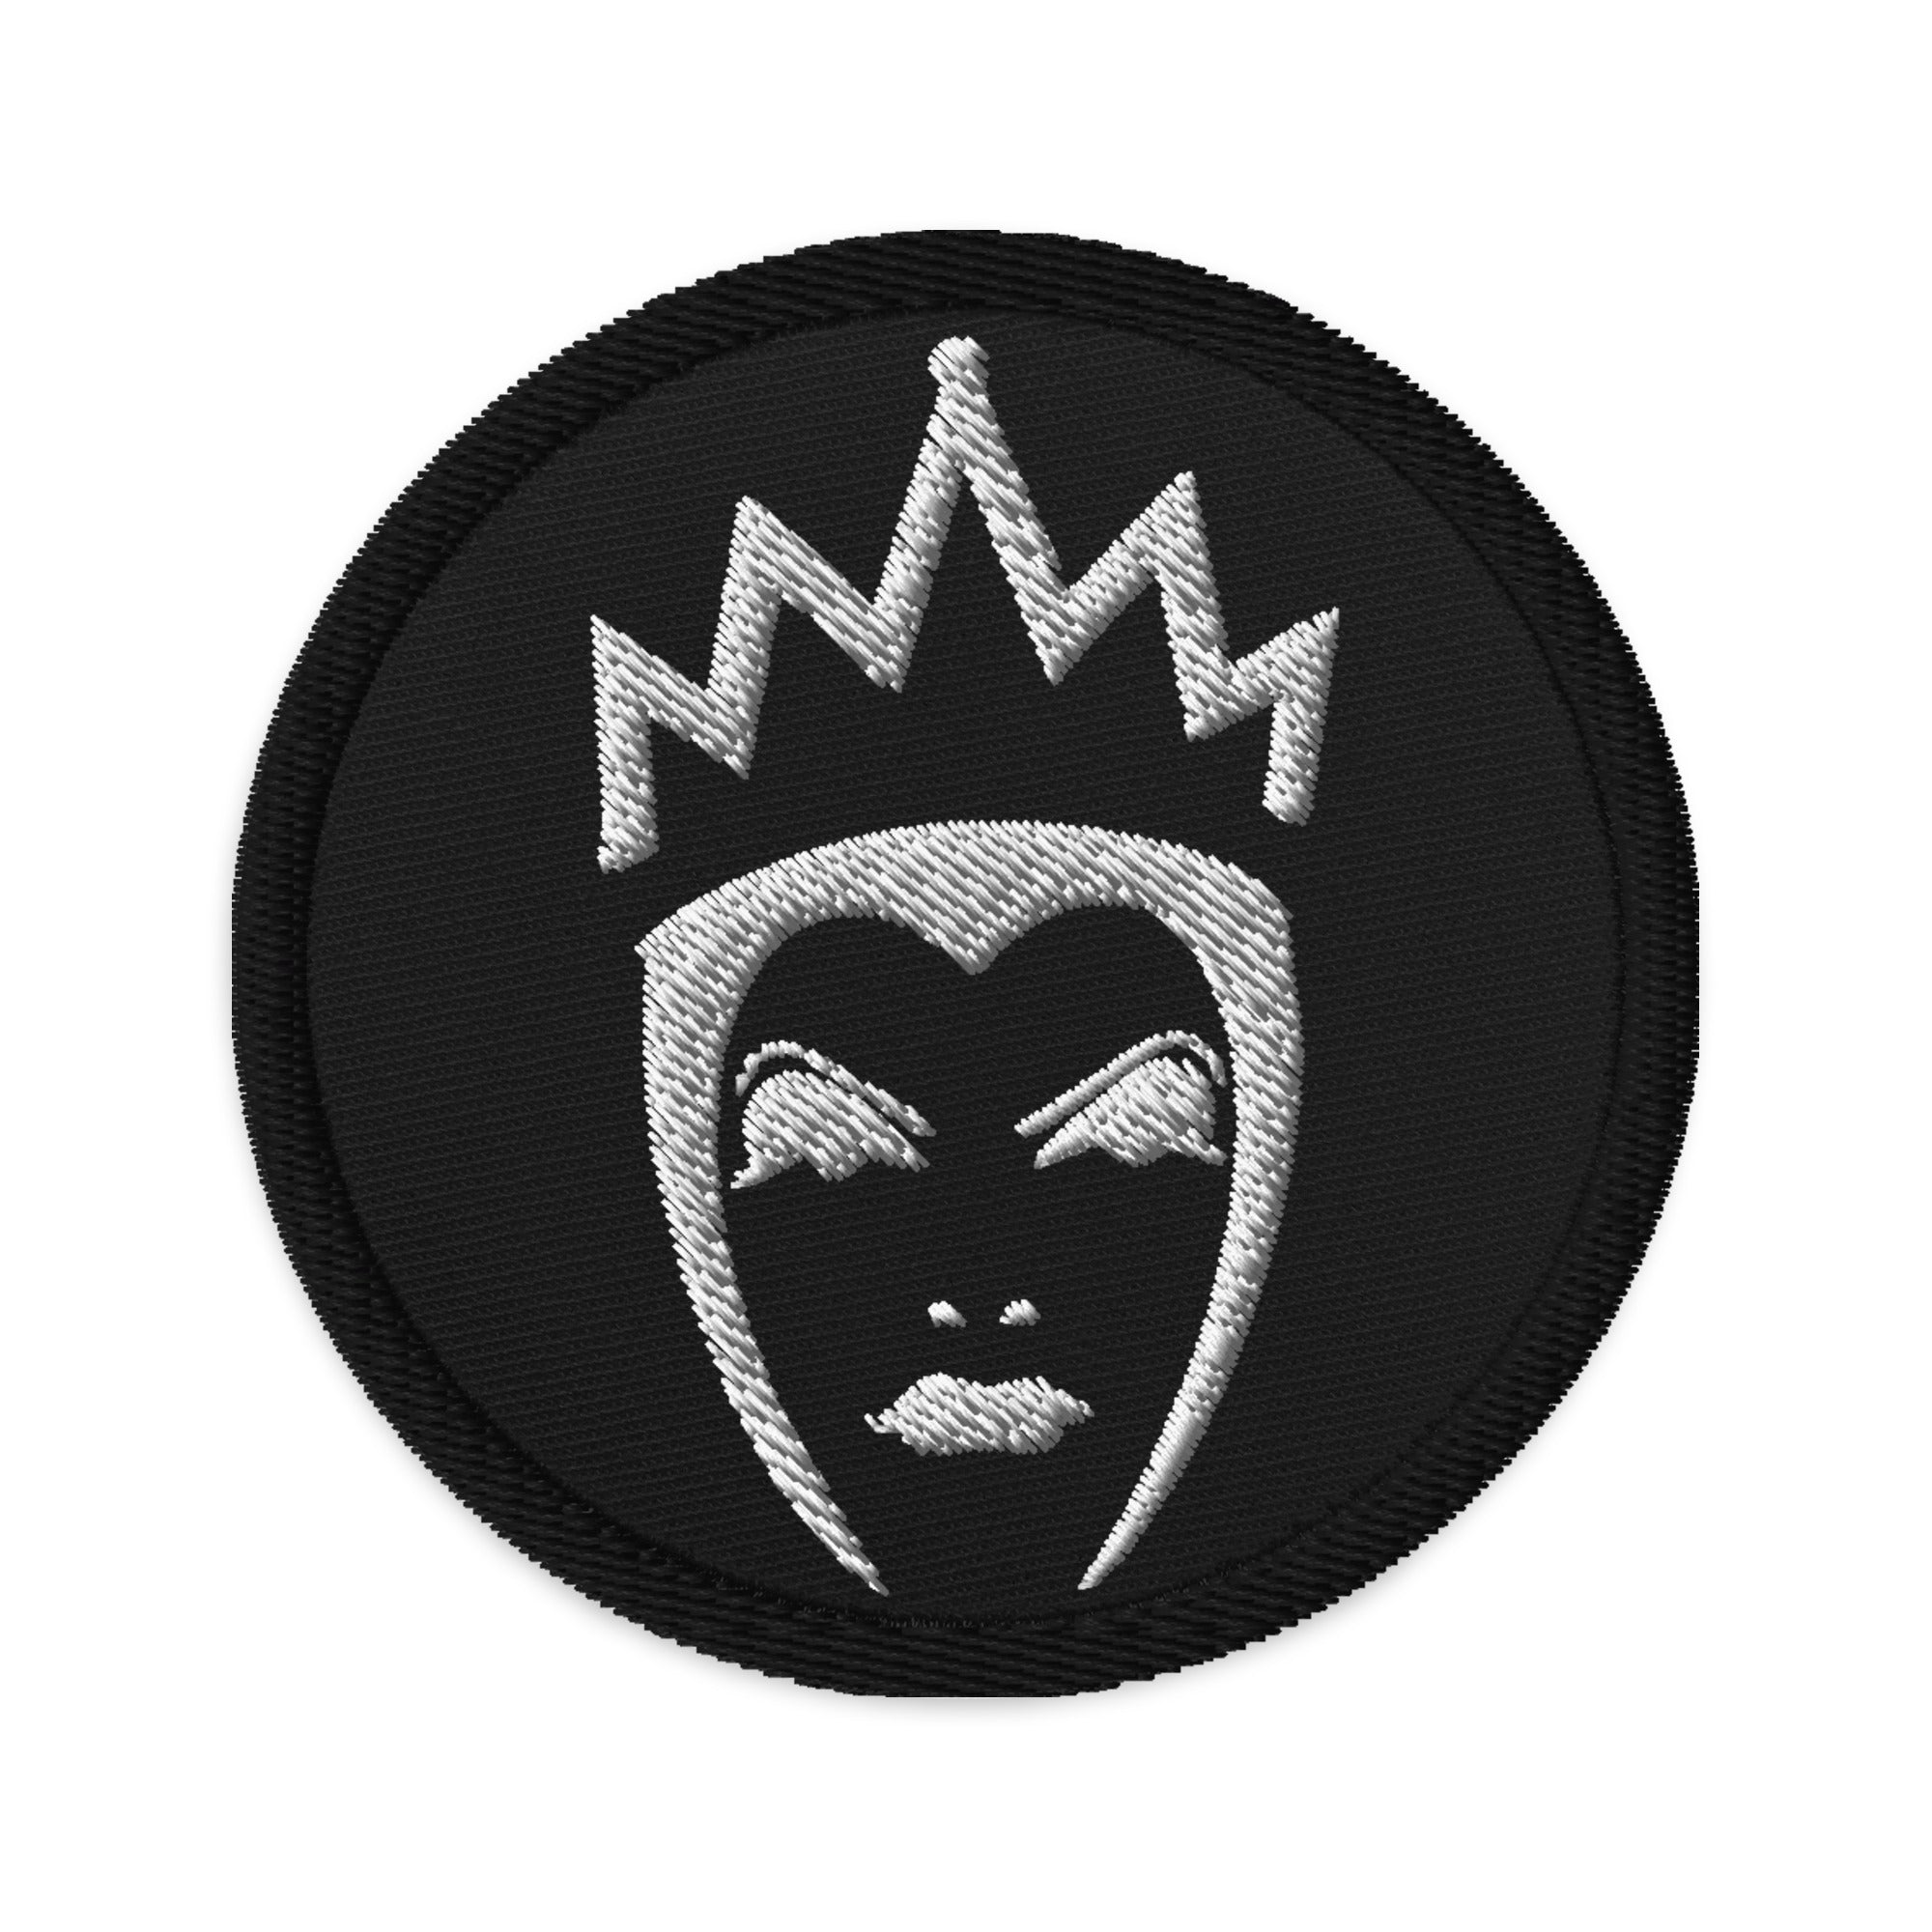 Evil Queen Embroidered Patch Grimm Fairytales - Edge of Life Designs